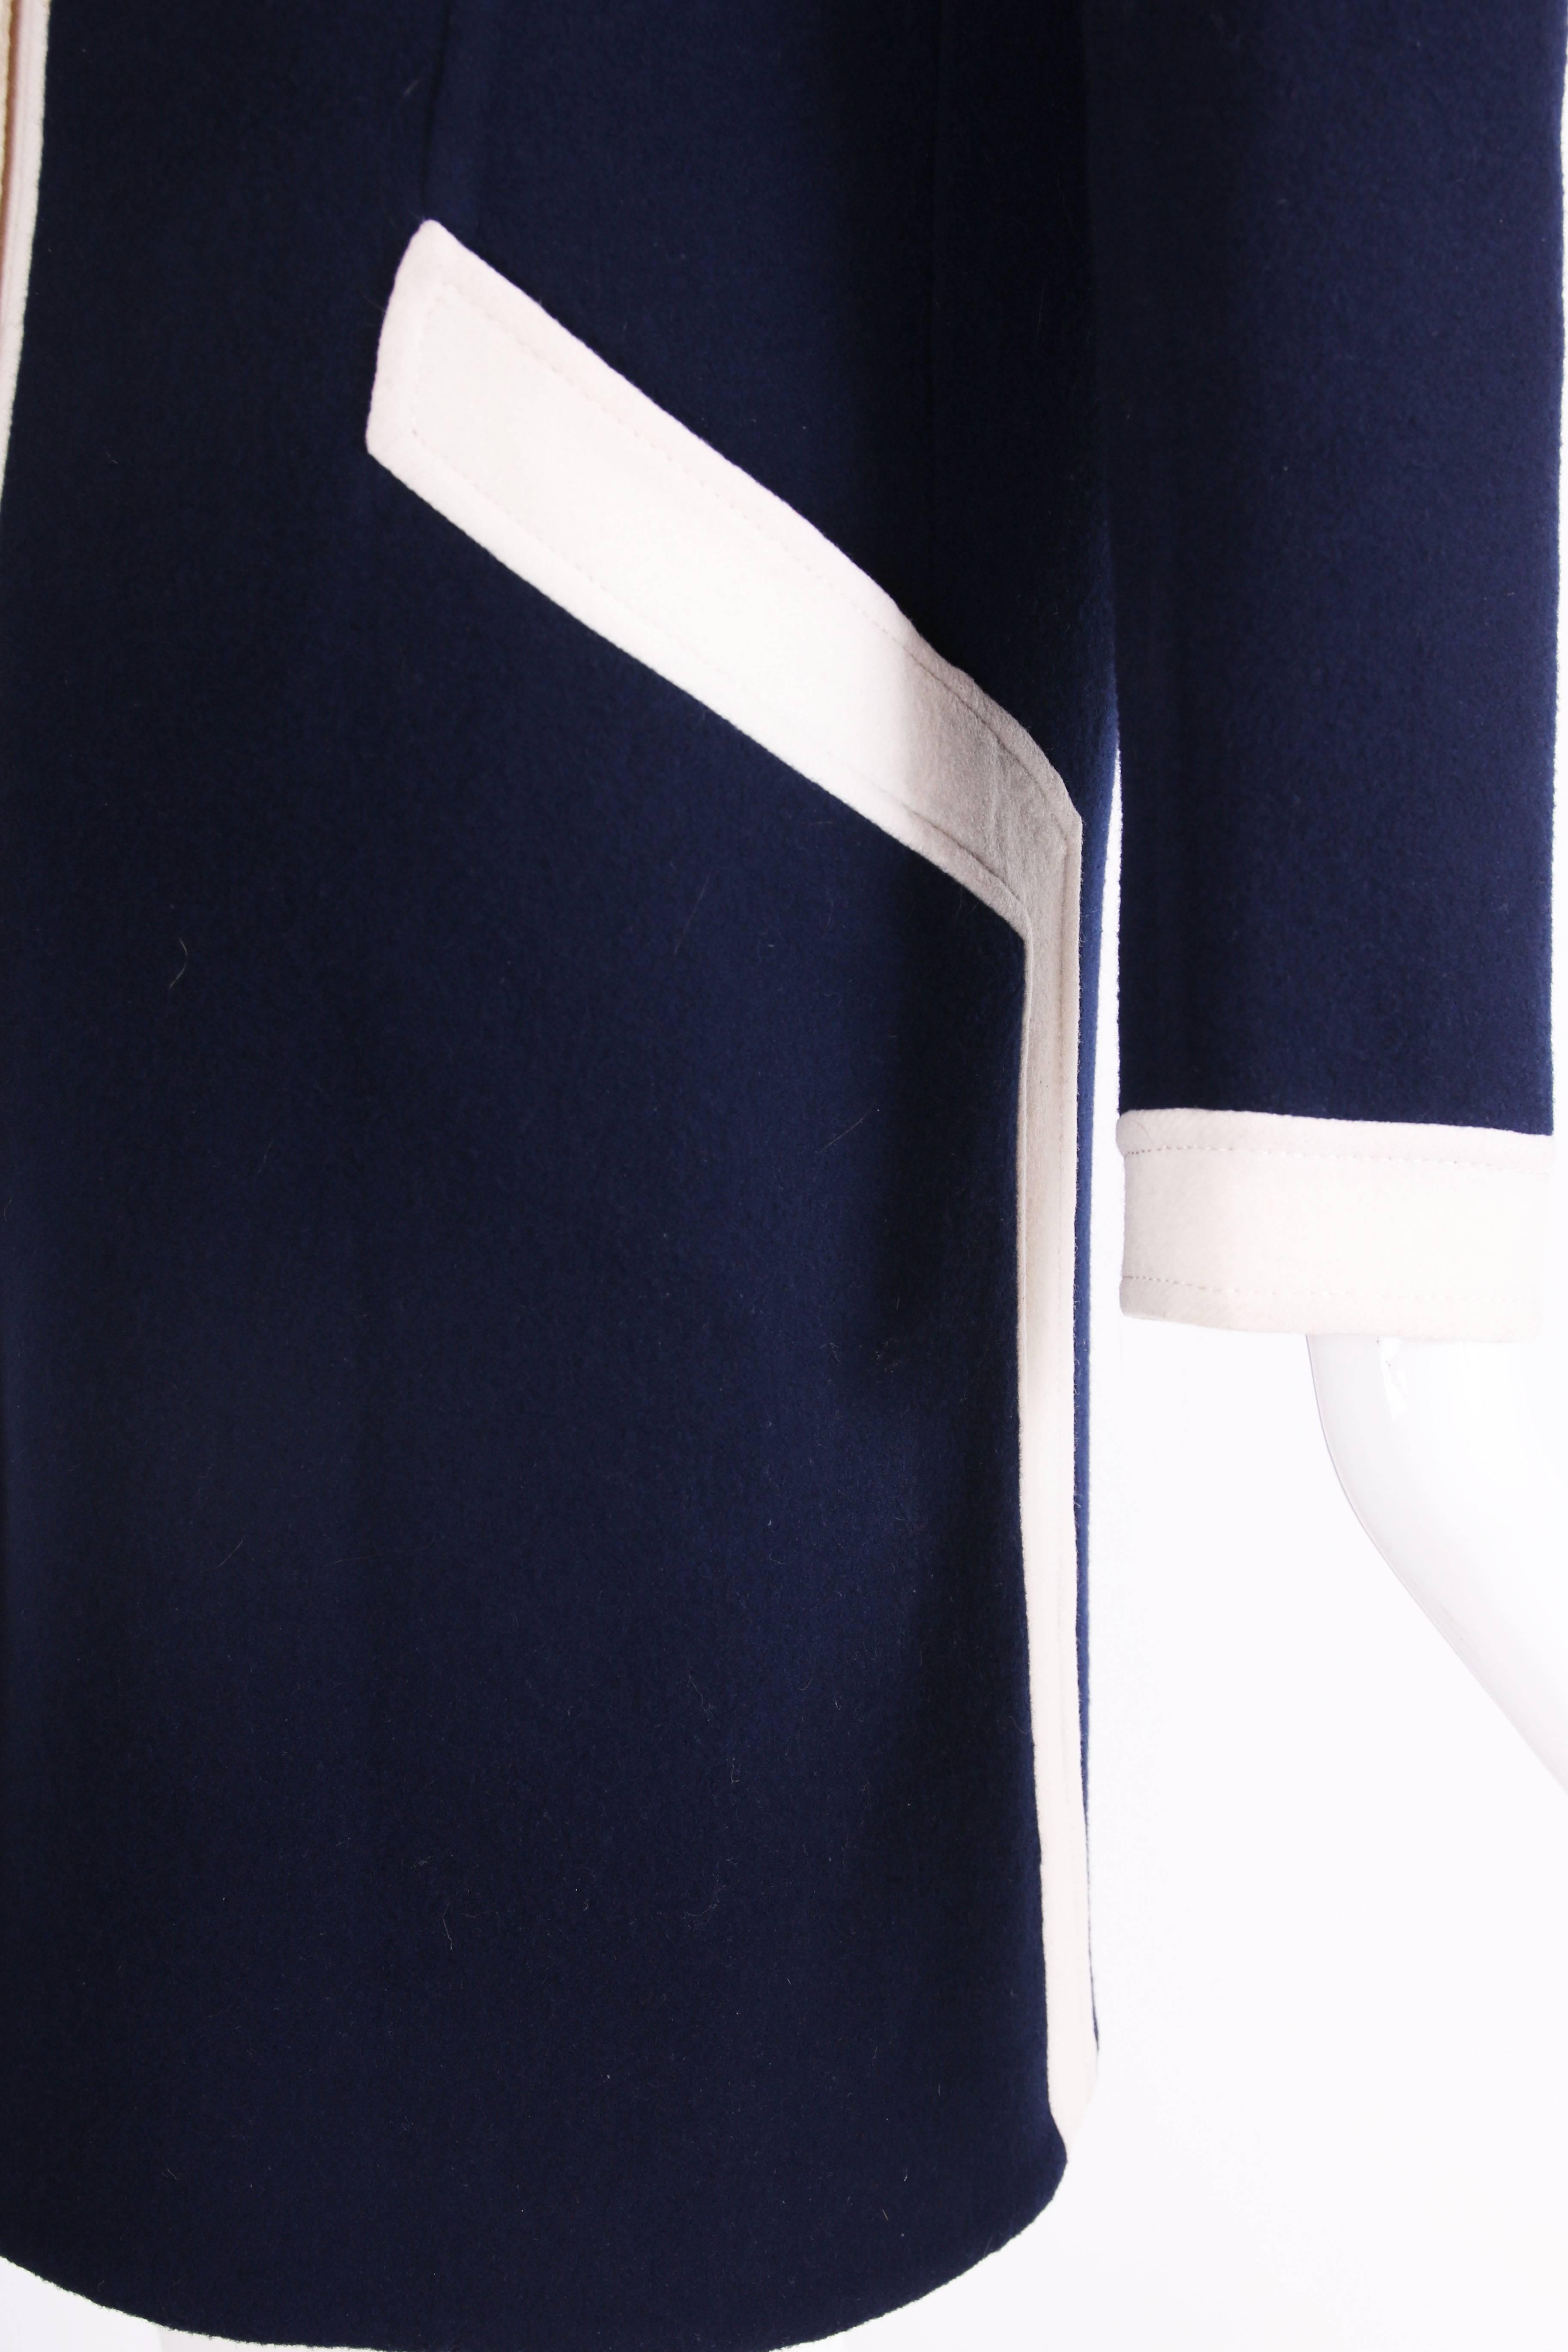 1970's Valentino Navy Melton Wool Coat Dress W/White Trim & Frontal Pockets  For Sale 1